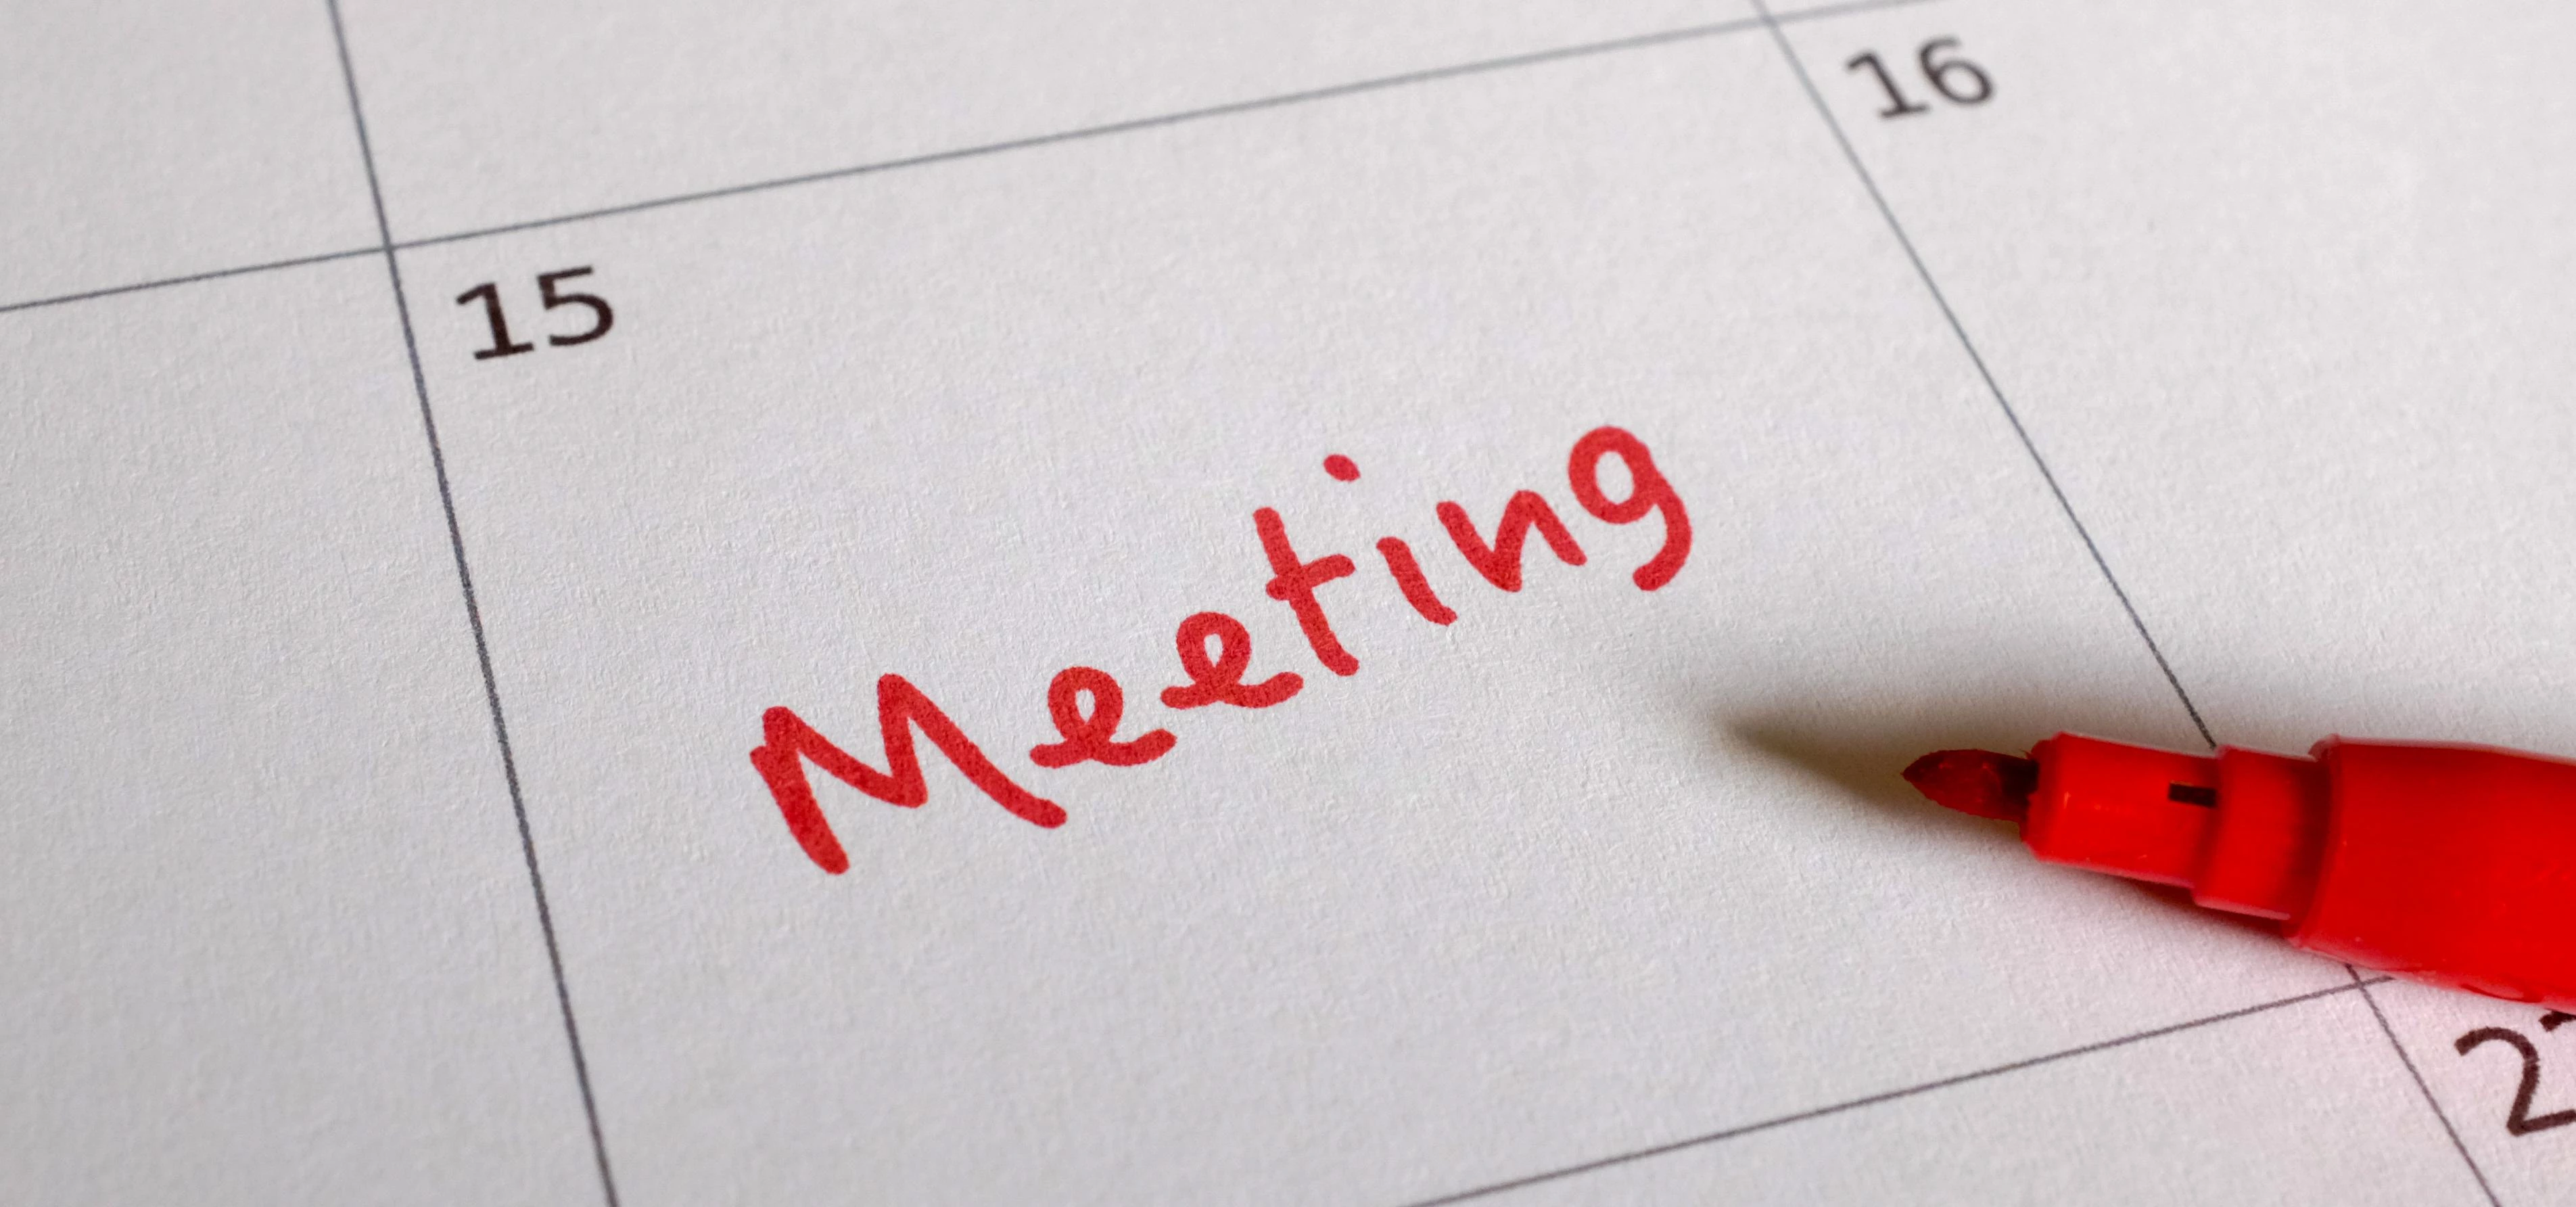 Meeting Appointment in Calendar/Journal